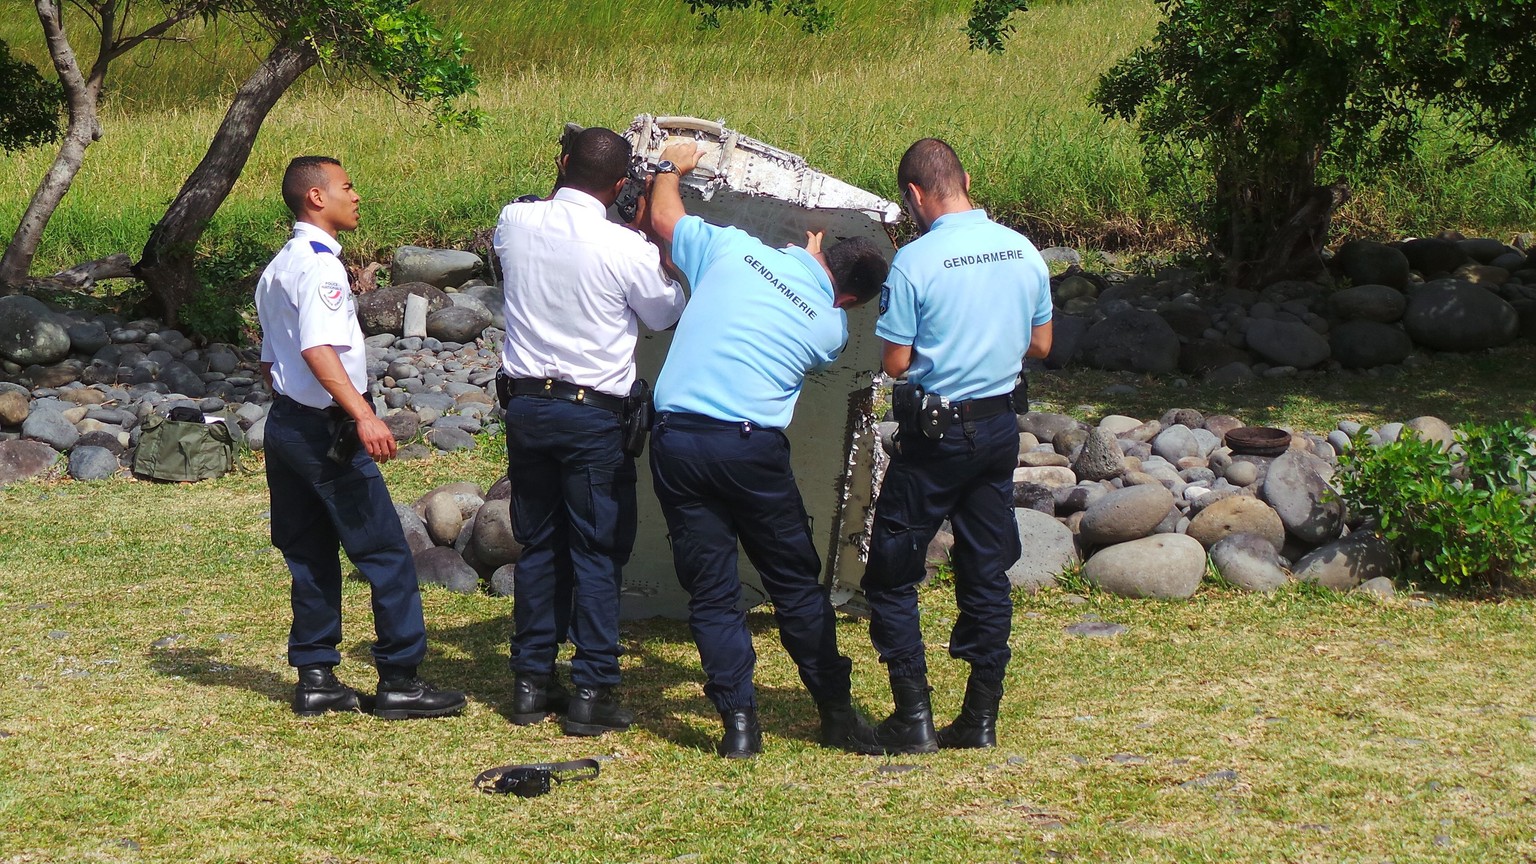 epa04866272 A picture made available 30 July 2015 shows members of French Gendarmerie and local authorities checking a piece of debris from an unidentified aircraft apparently washed ashore in Saint-A ...